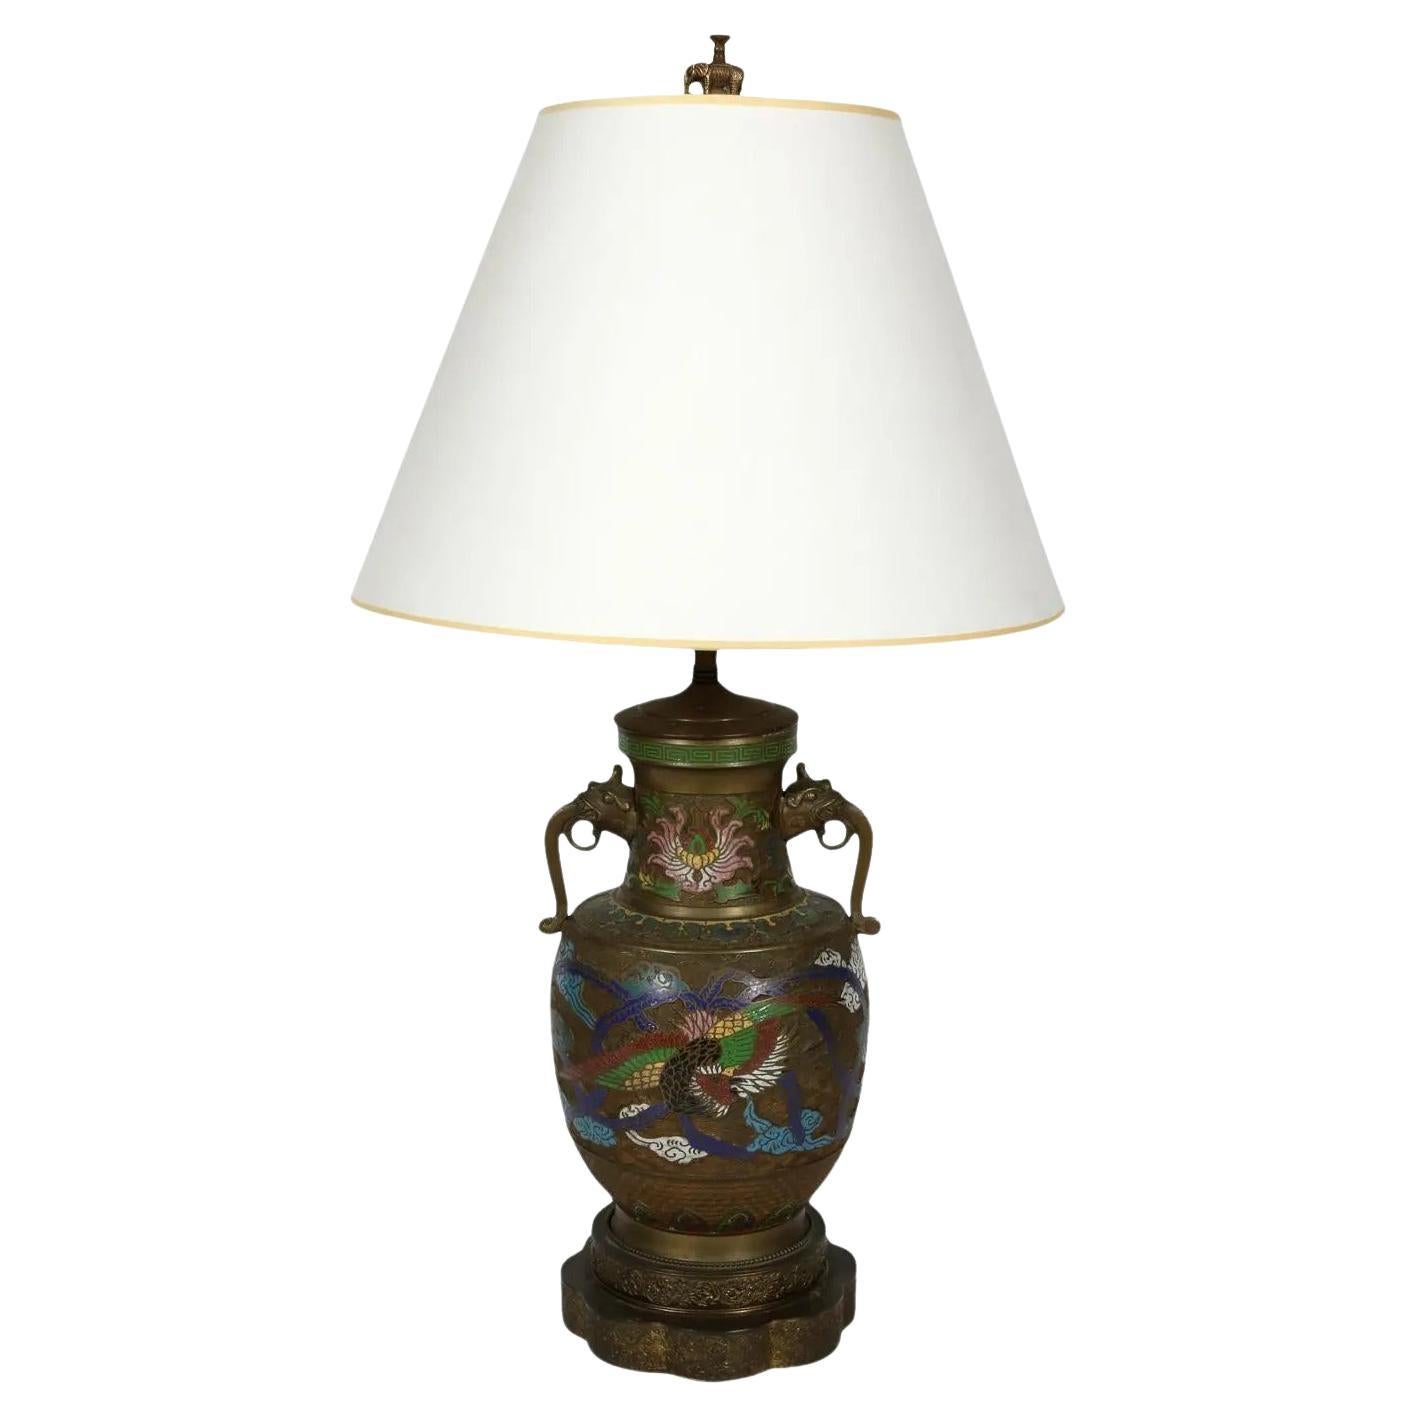 Antique Champlevé Handled Urn Mounted as Lamp